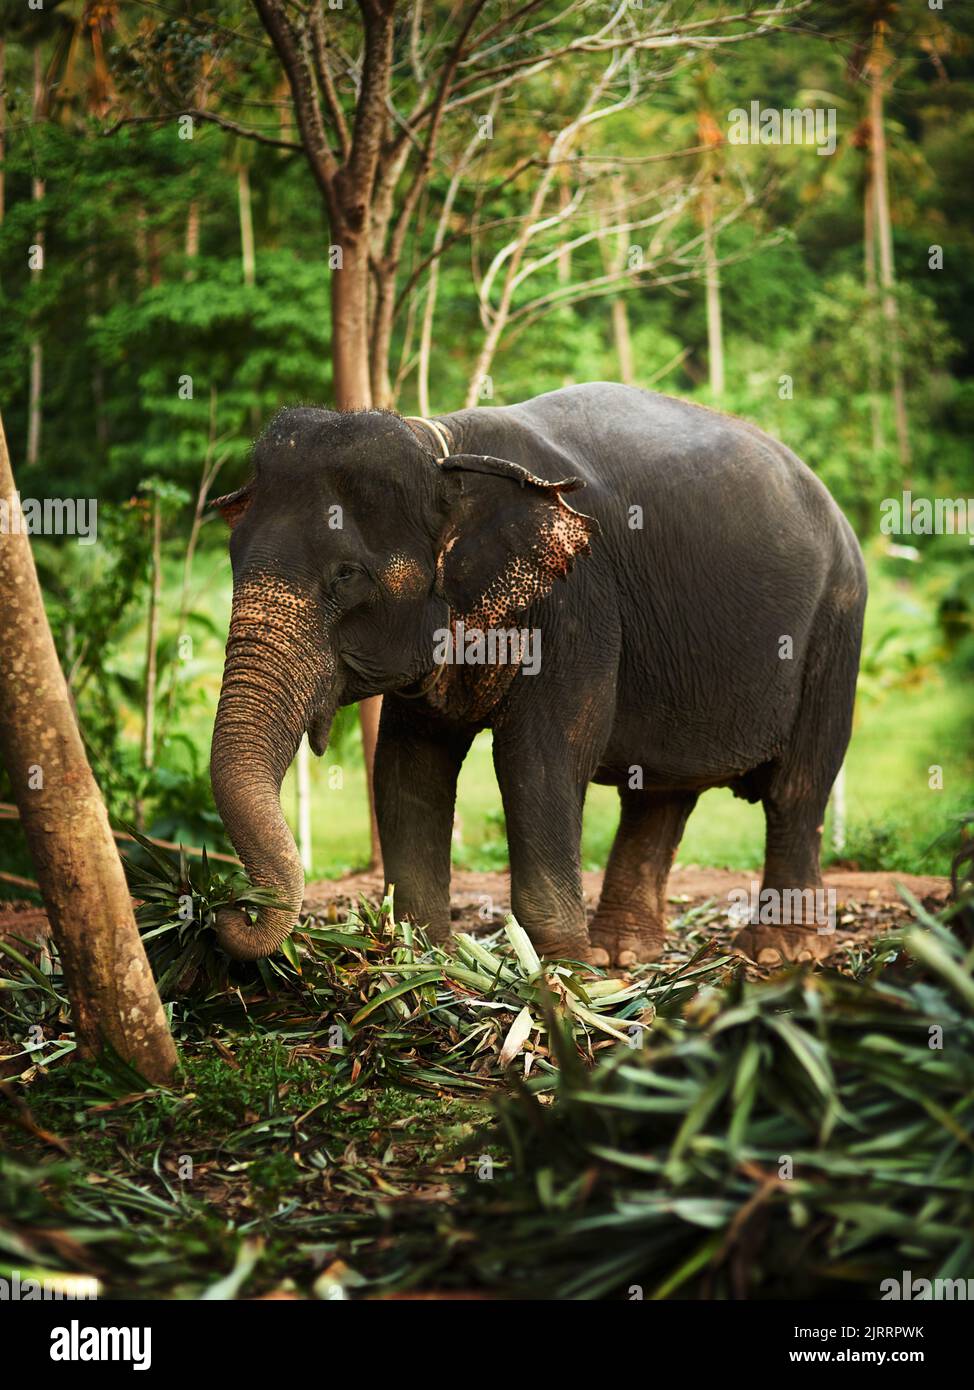 Happy jungle elephant. a elephant walking in the jungle going about its day and eating plants. Stock Photo